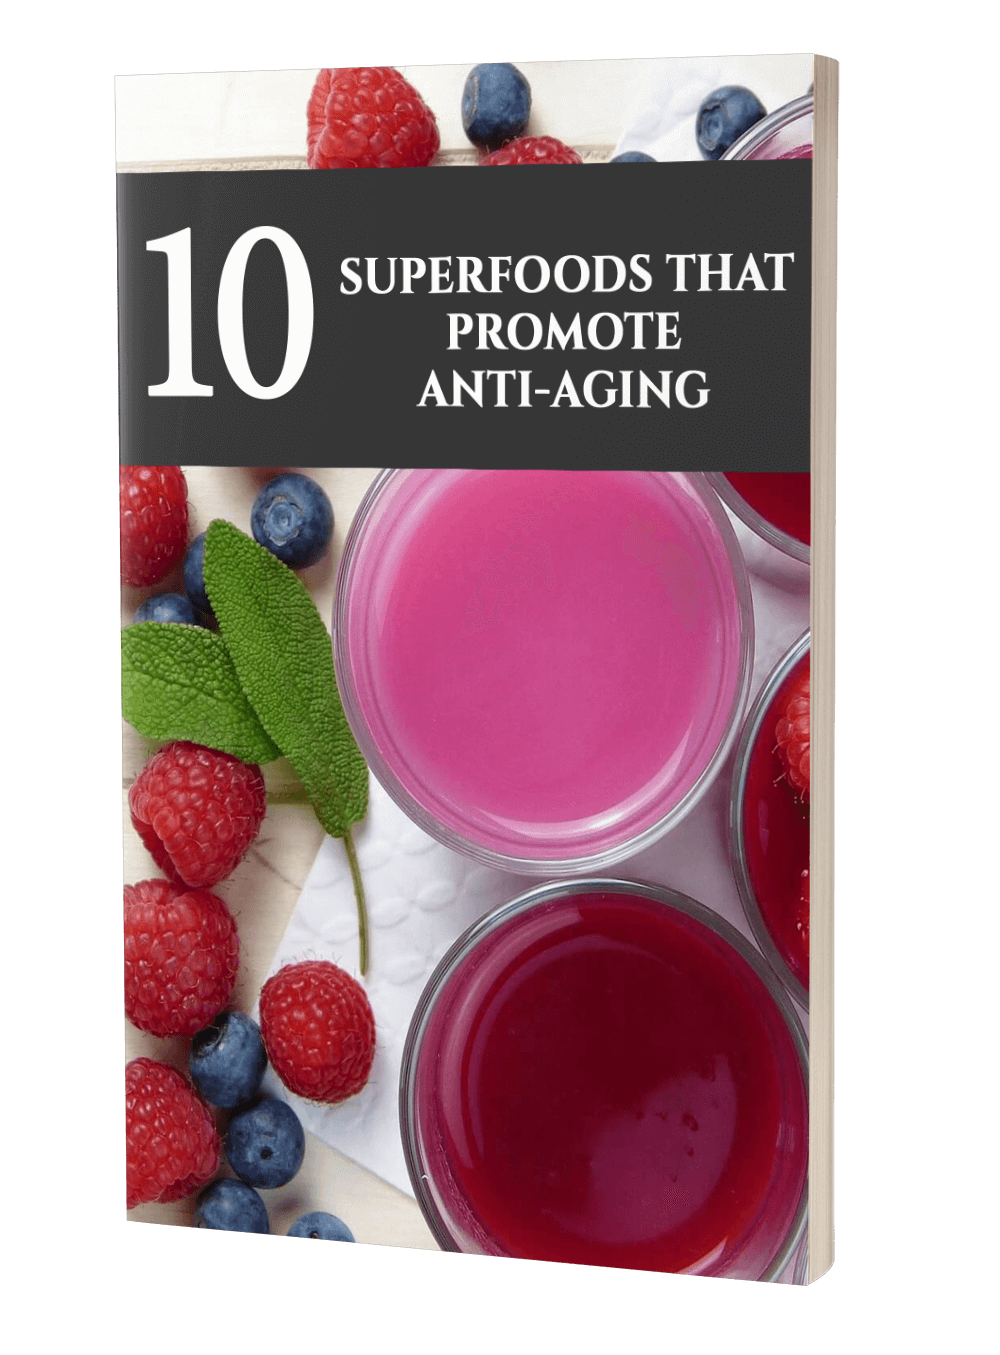 10 Superfoods That Promote Anti-Aging